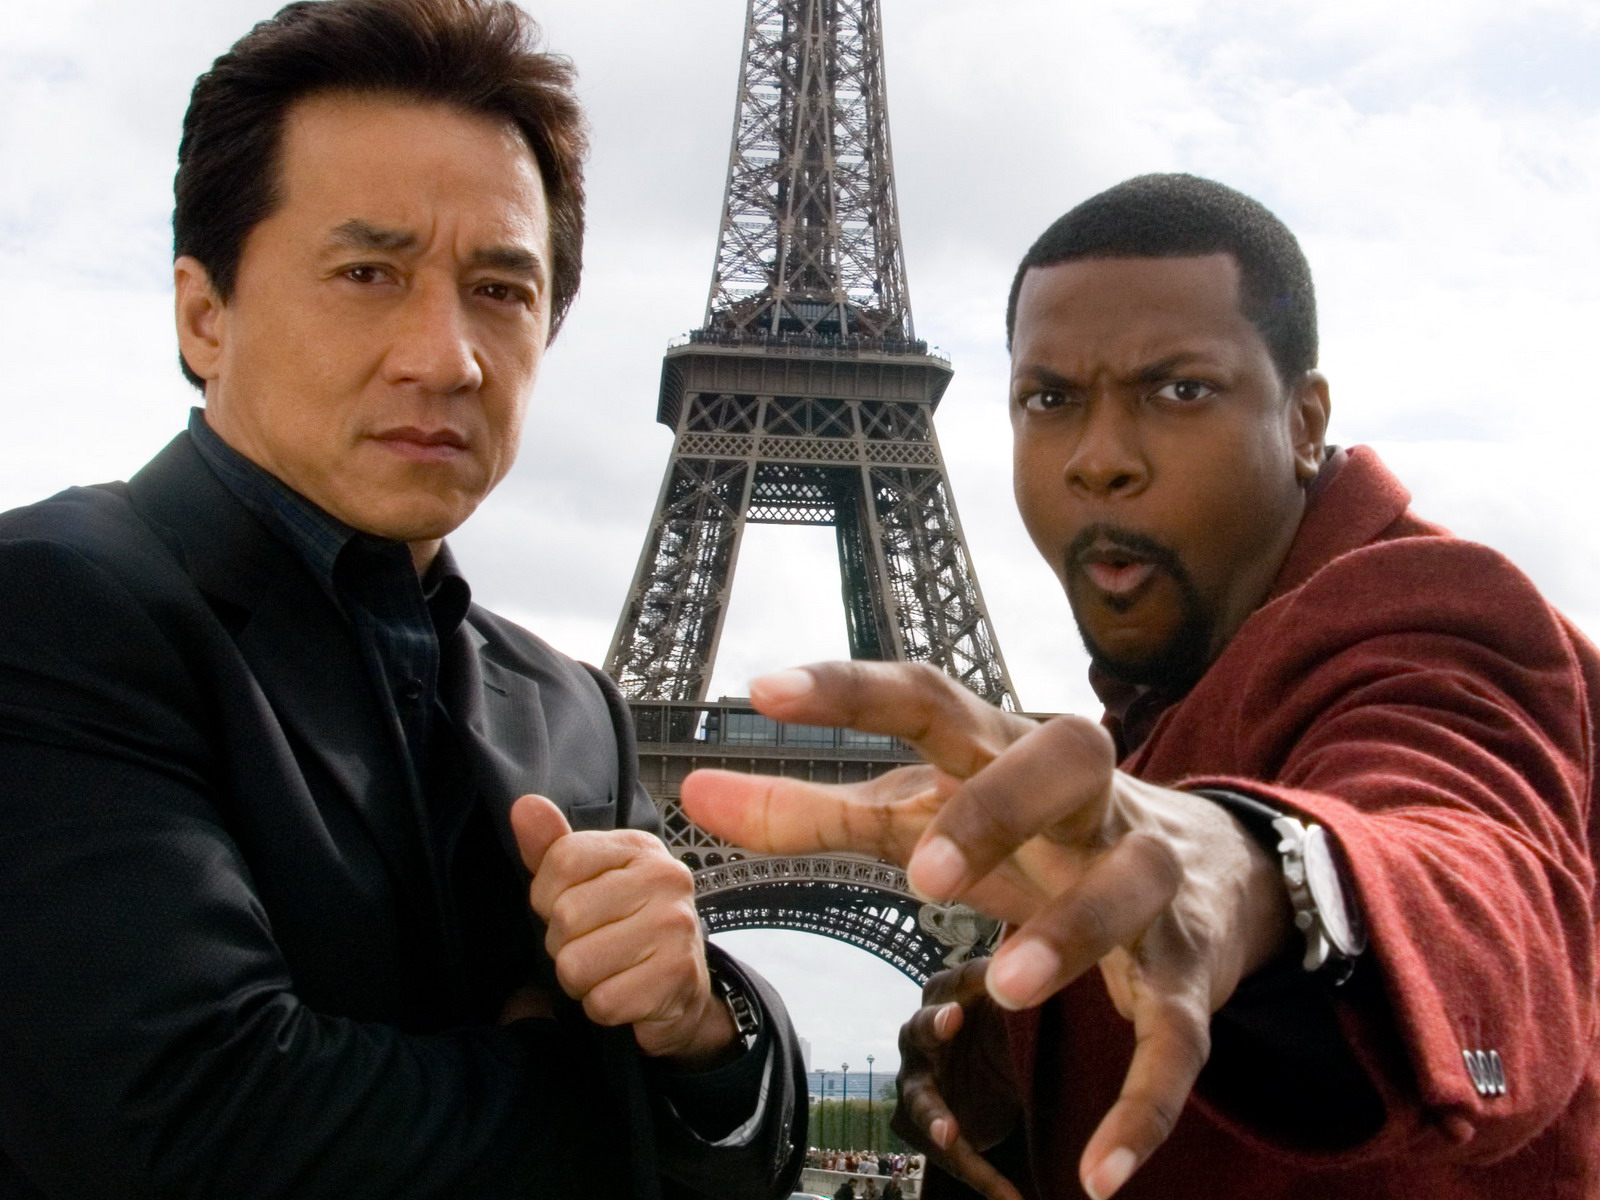 The Source. Rush Hour Is Making A Return To The (Small) Screen